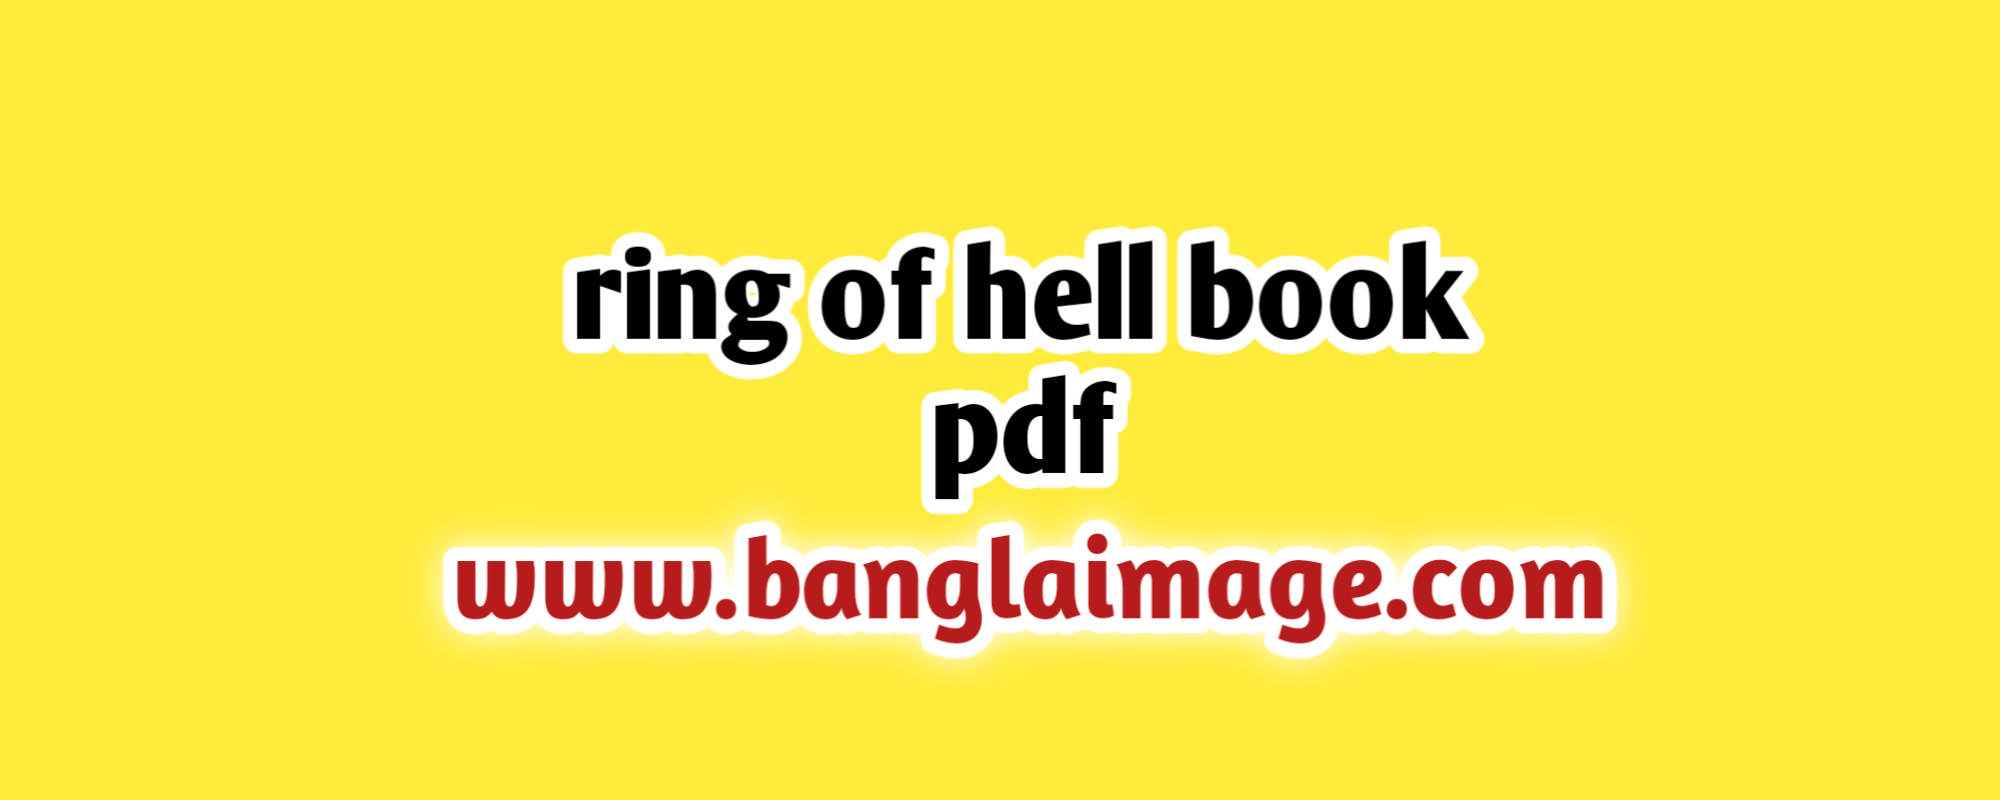 ring of hell book pdf, ring of hell benoit, ring of hell benoit book free, ring of hell book